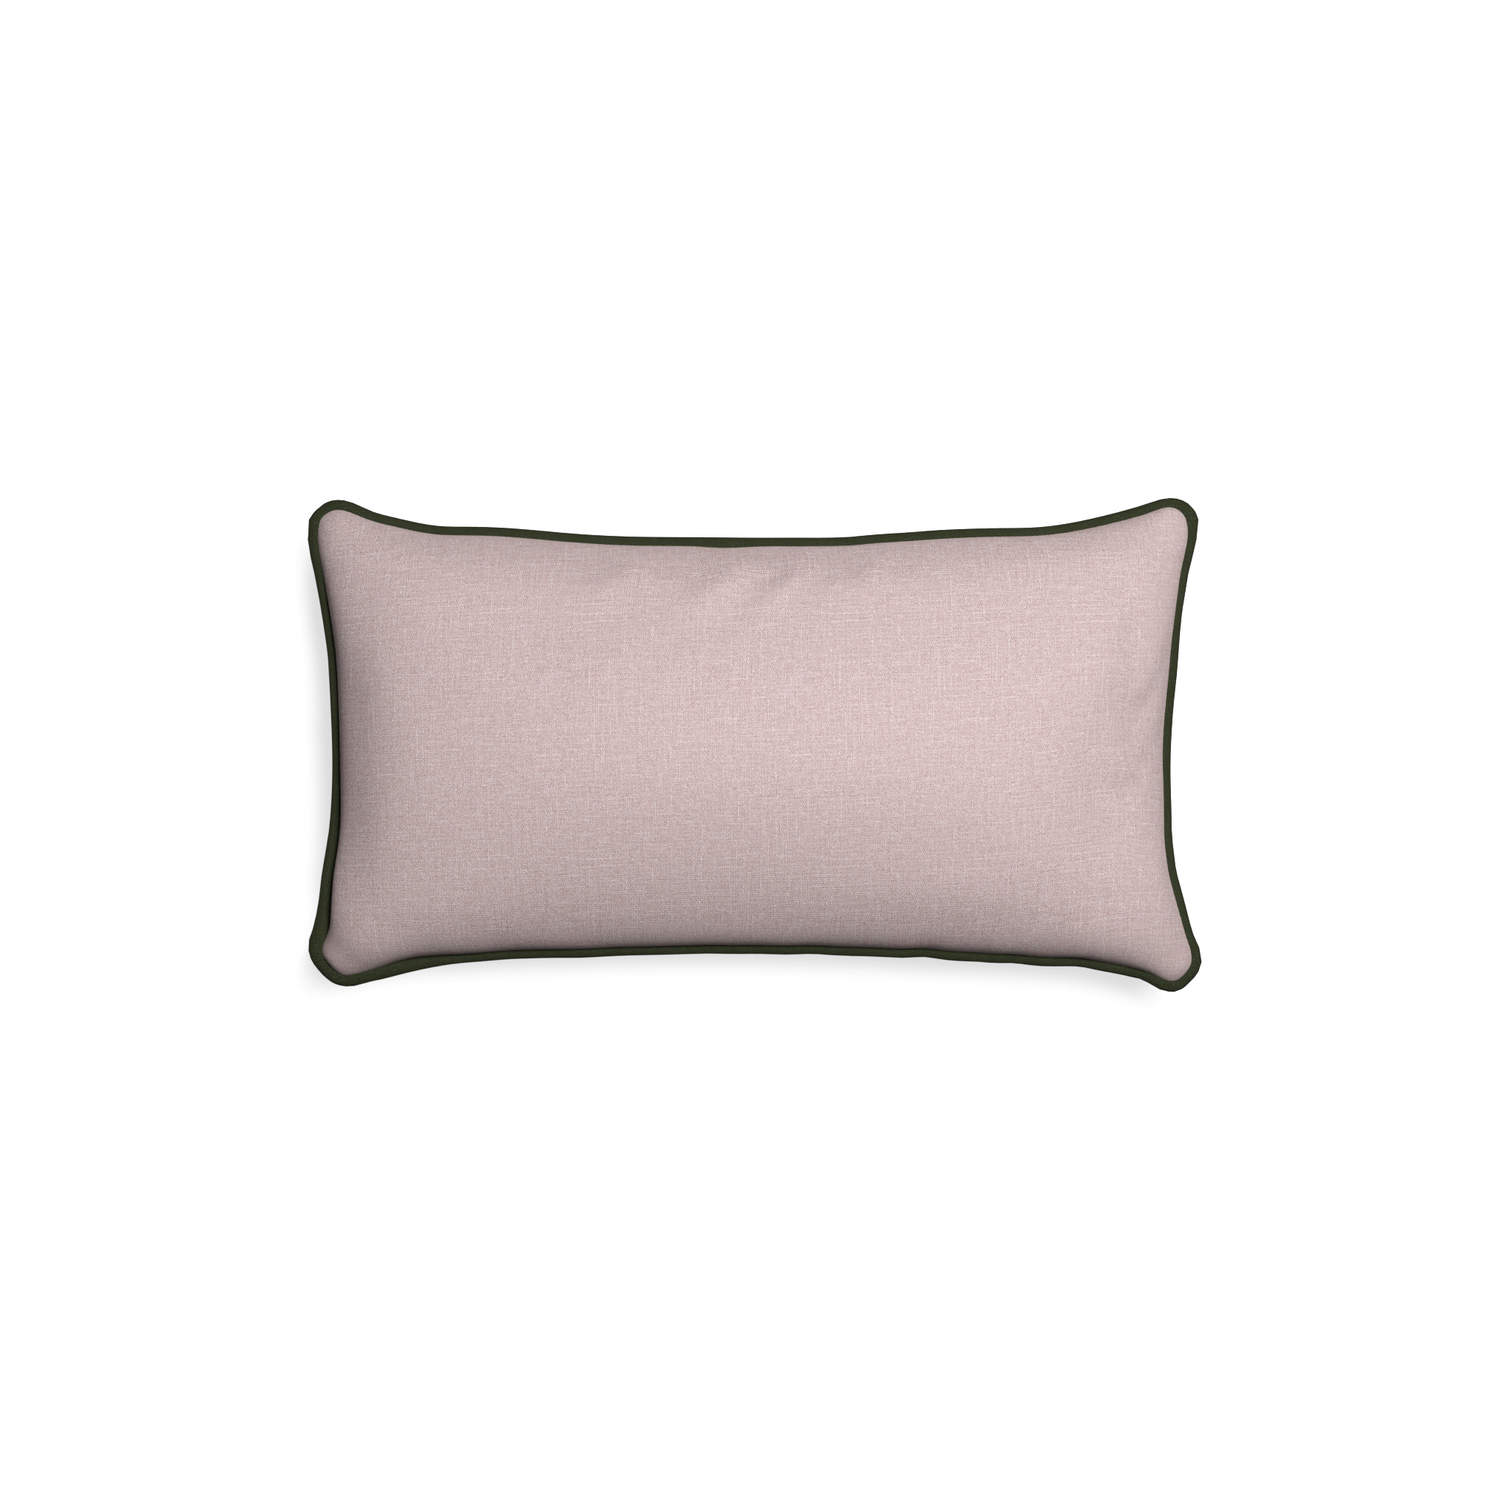 Petite-lumbar orchid custom mauve pinkpillow with f piping on white background